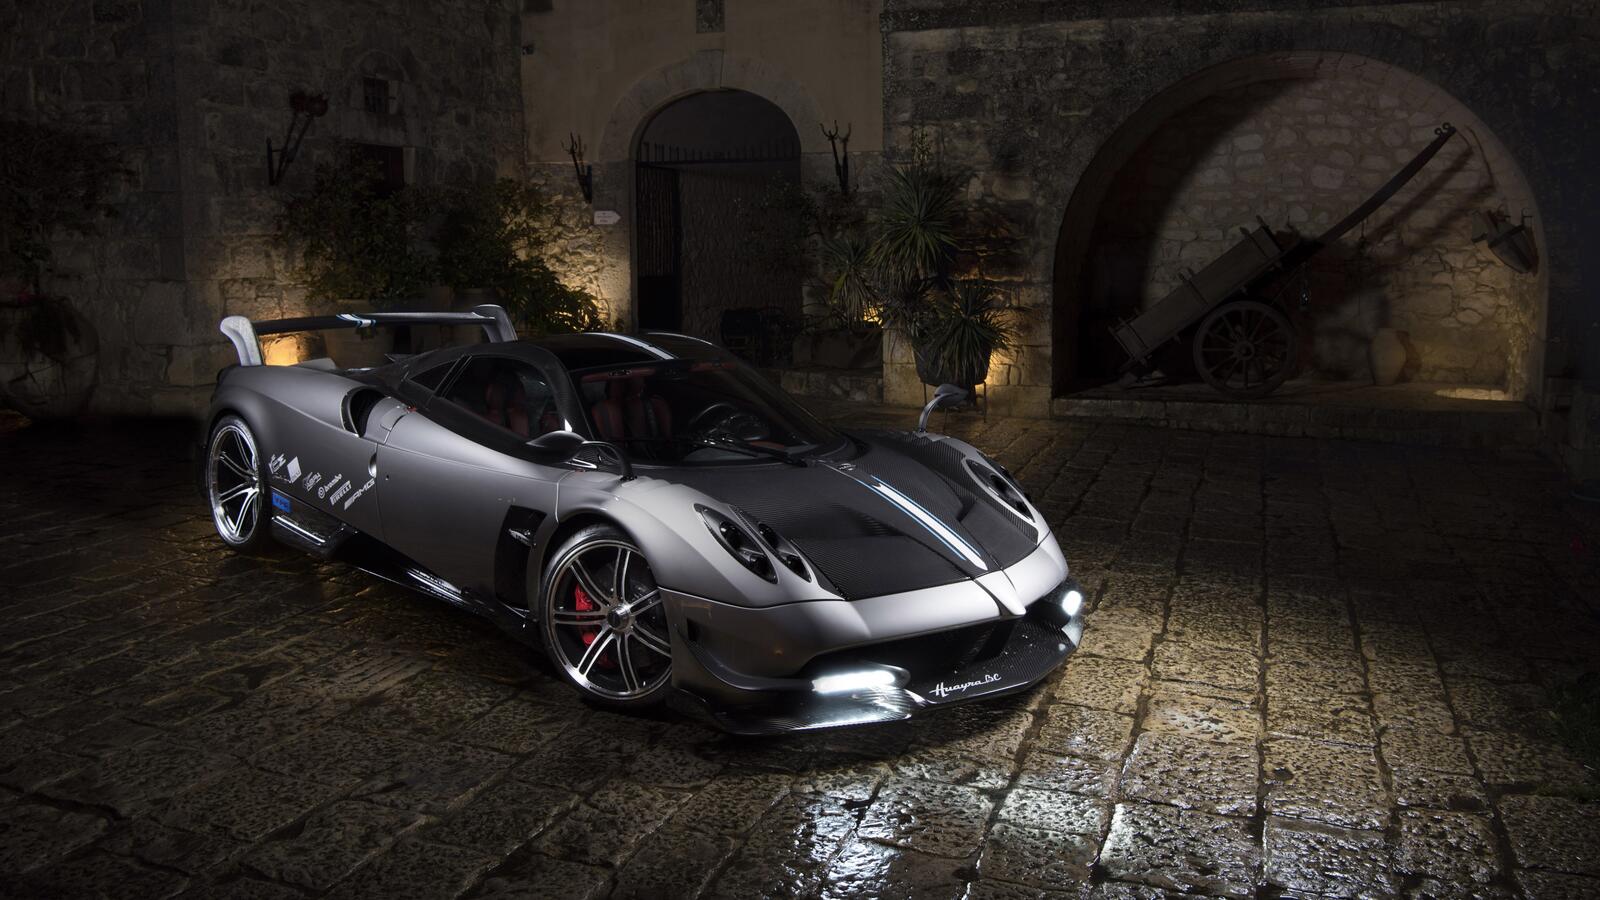 Free photo Pagani huayra in an ancient castle.